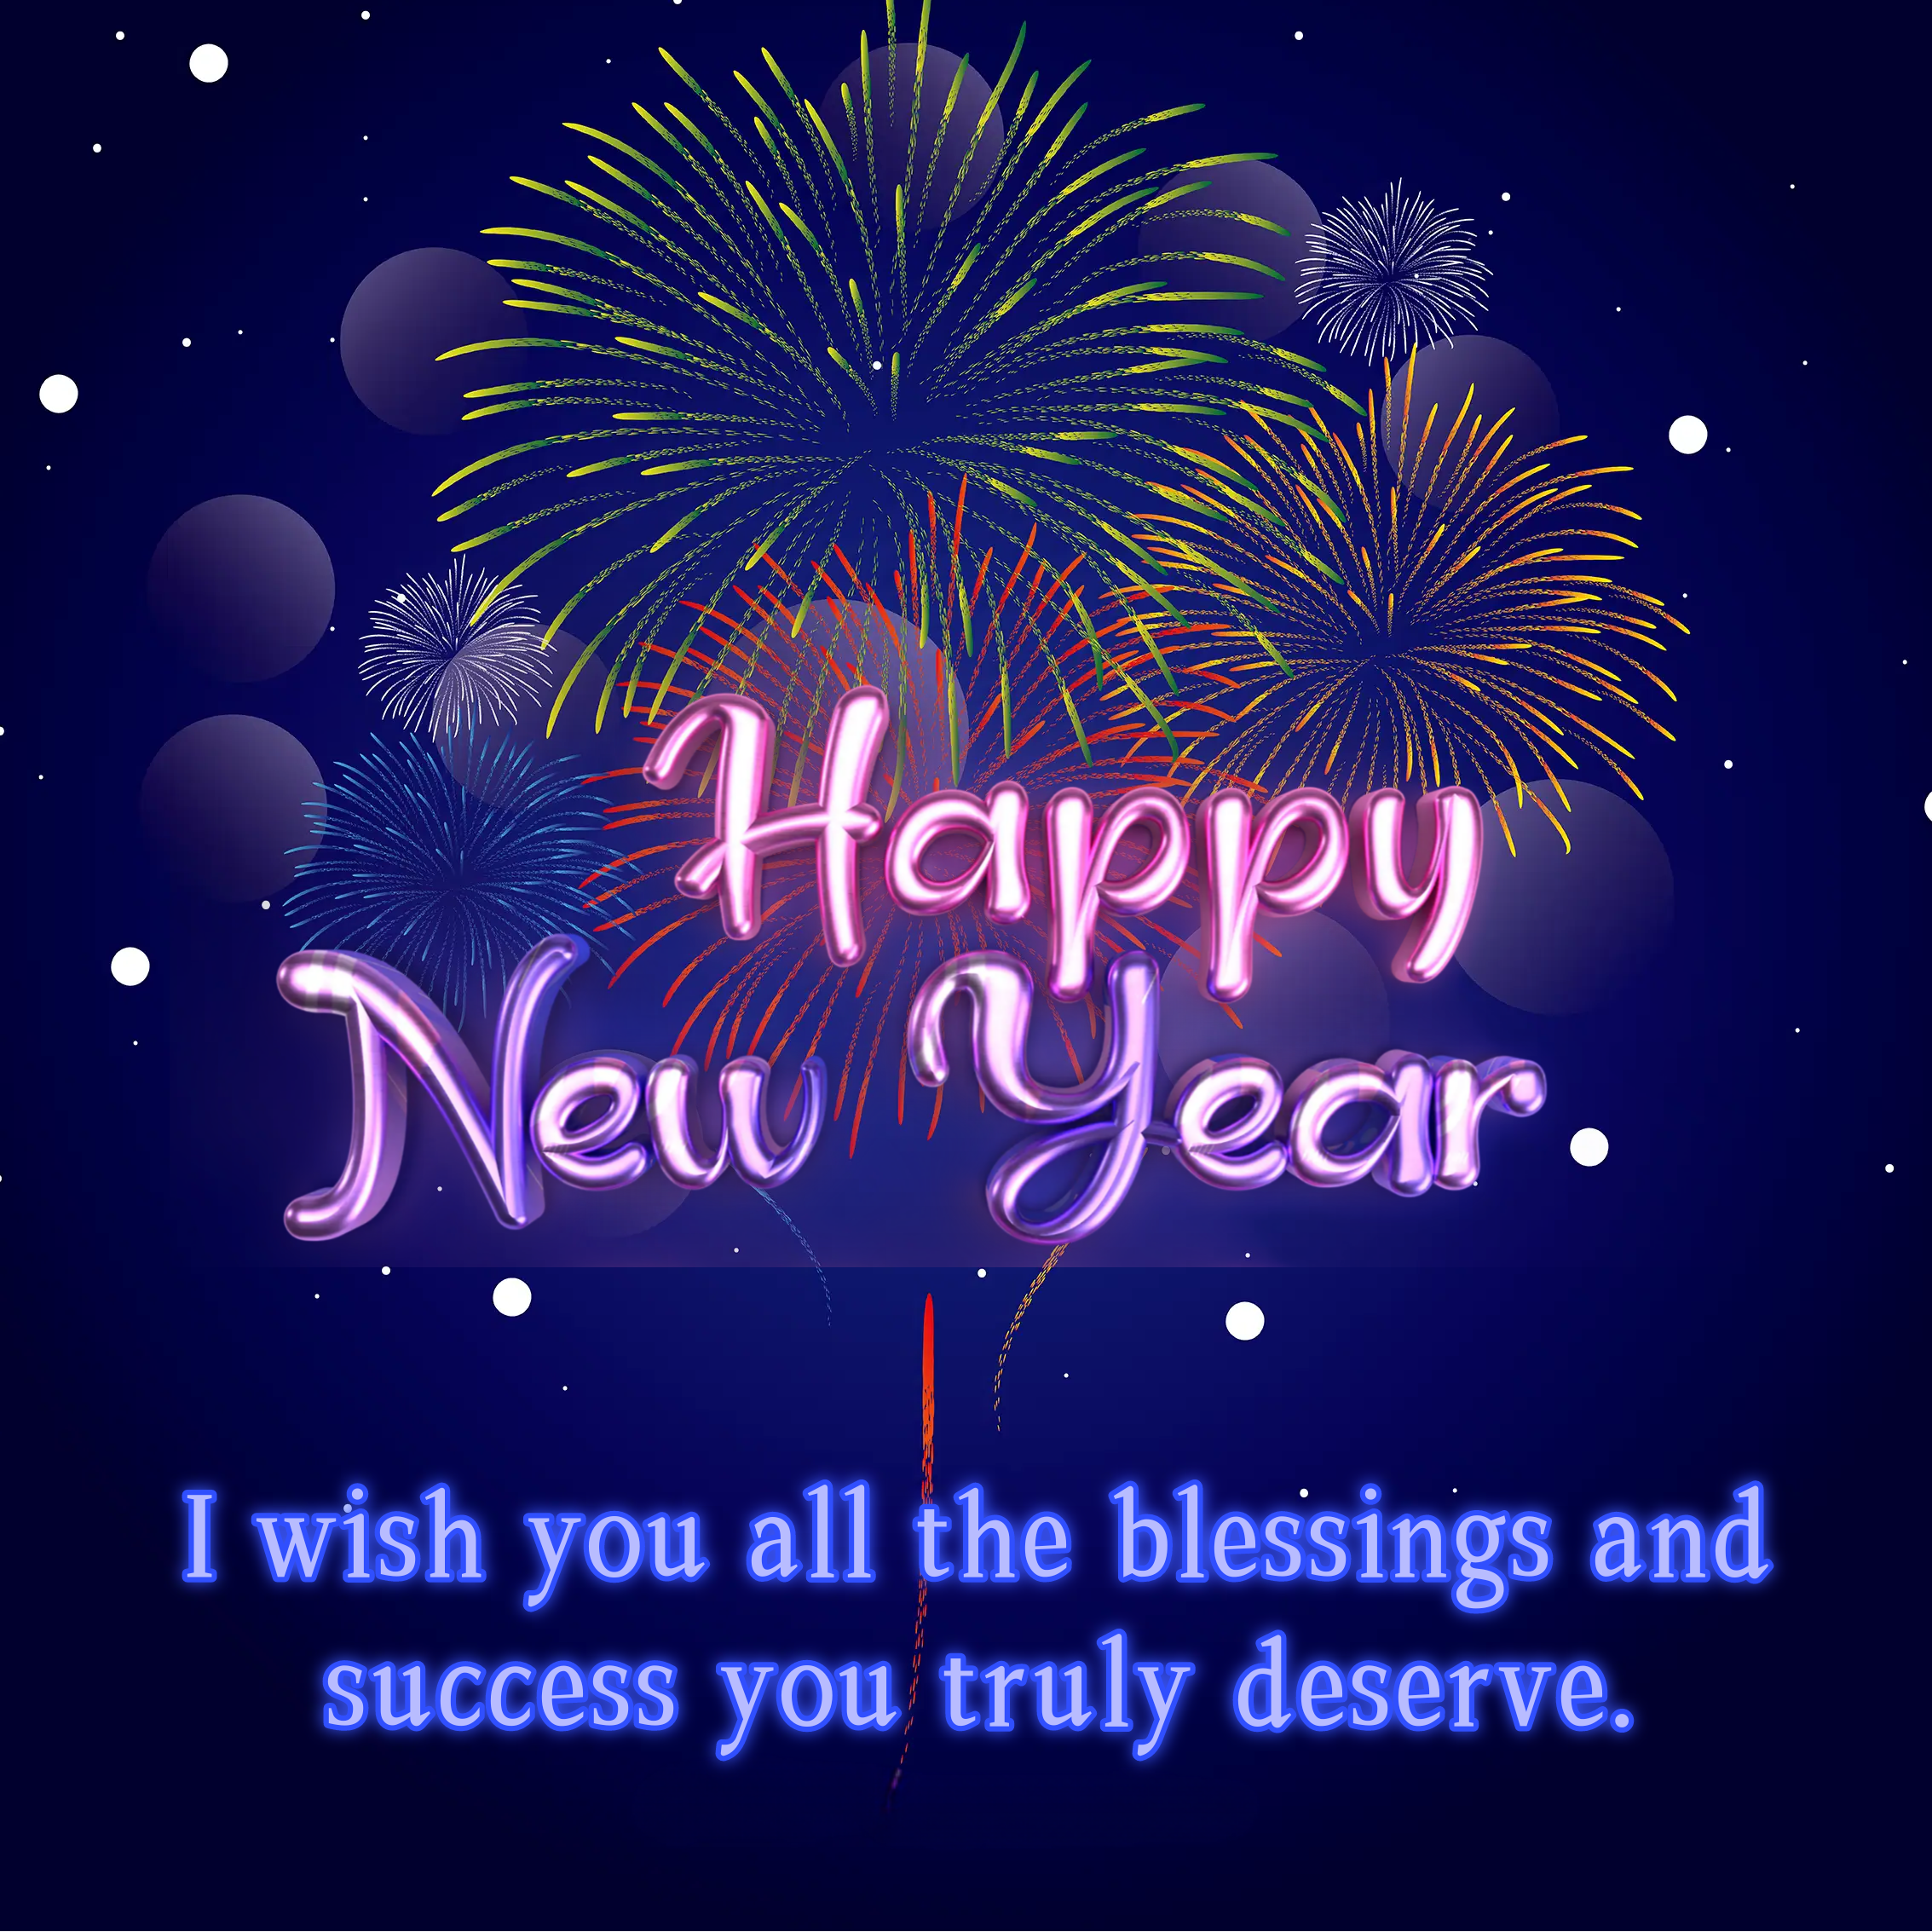 I wish you all the blessings and success you truly deserve